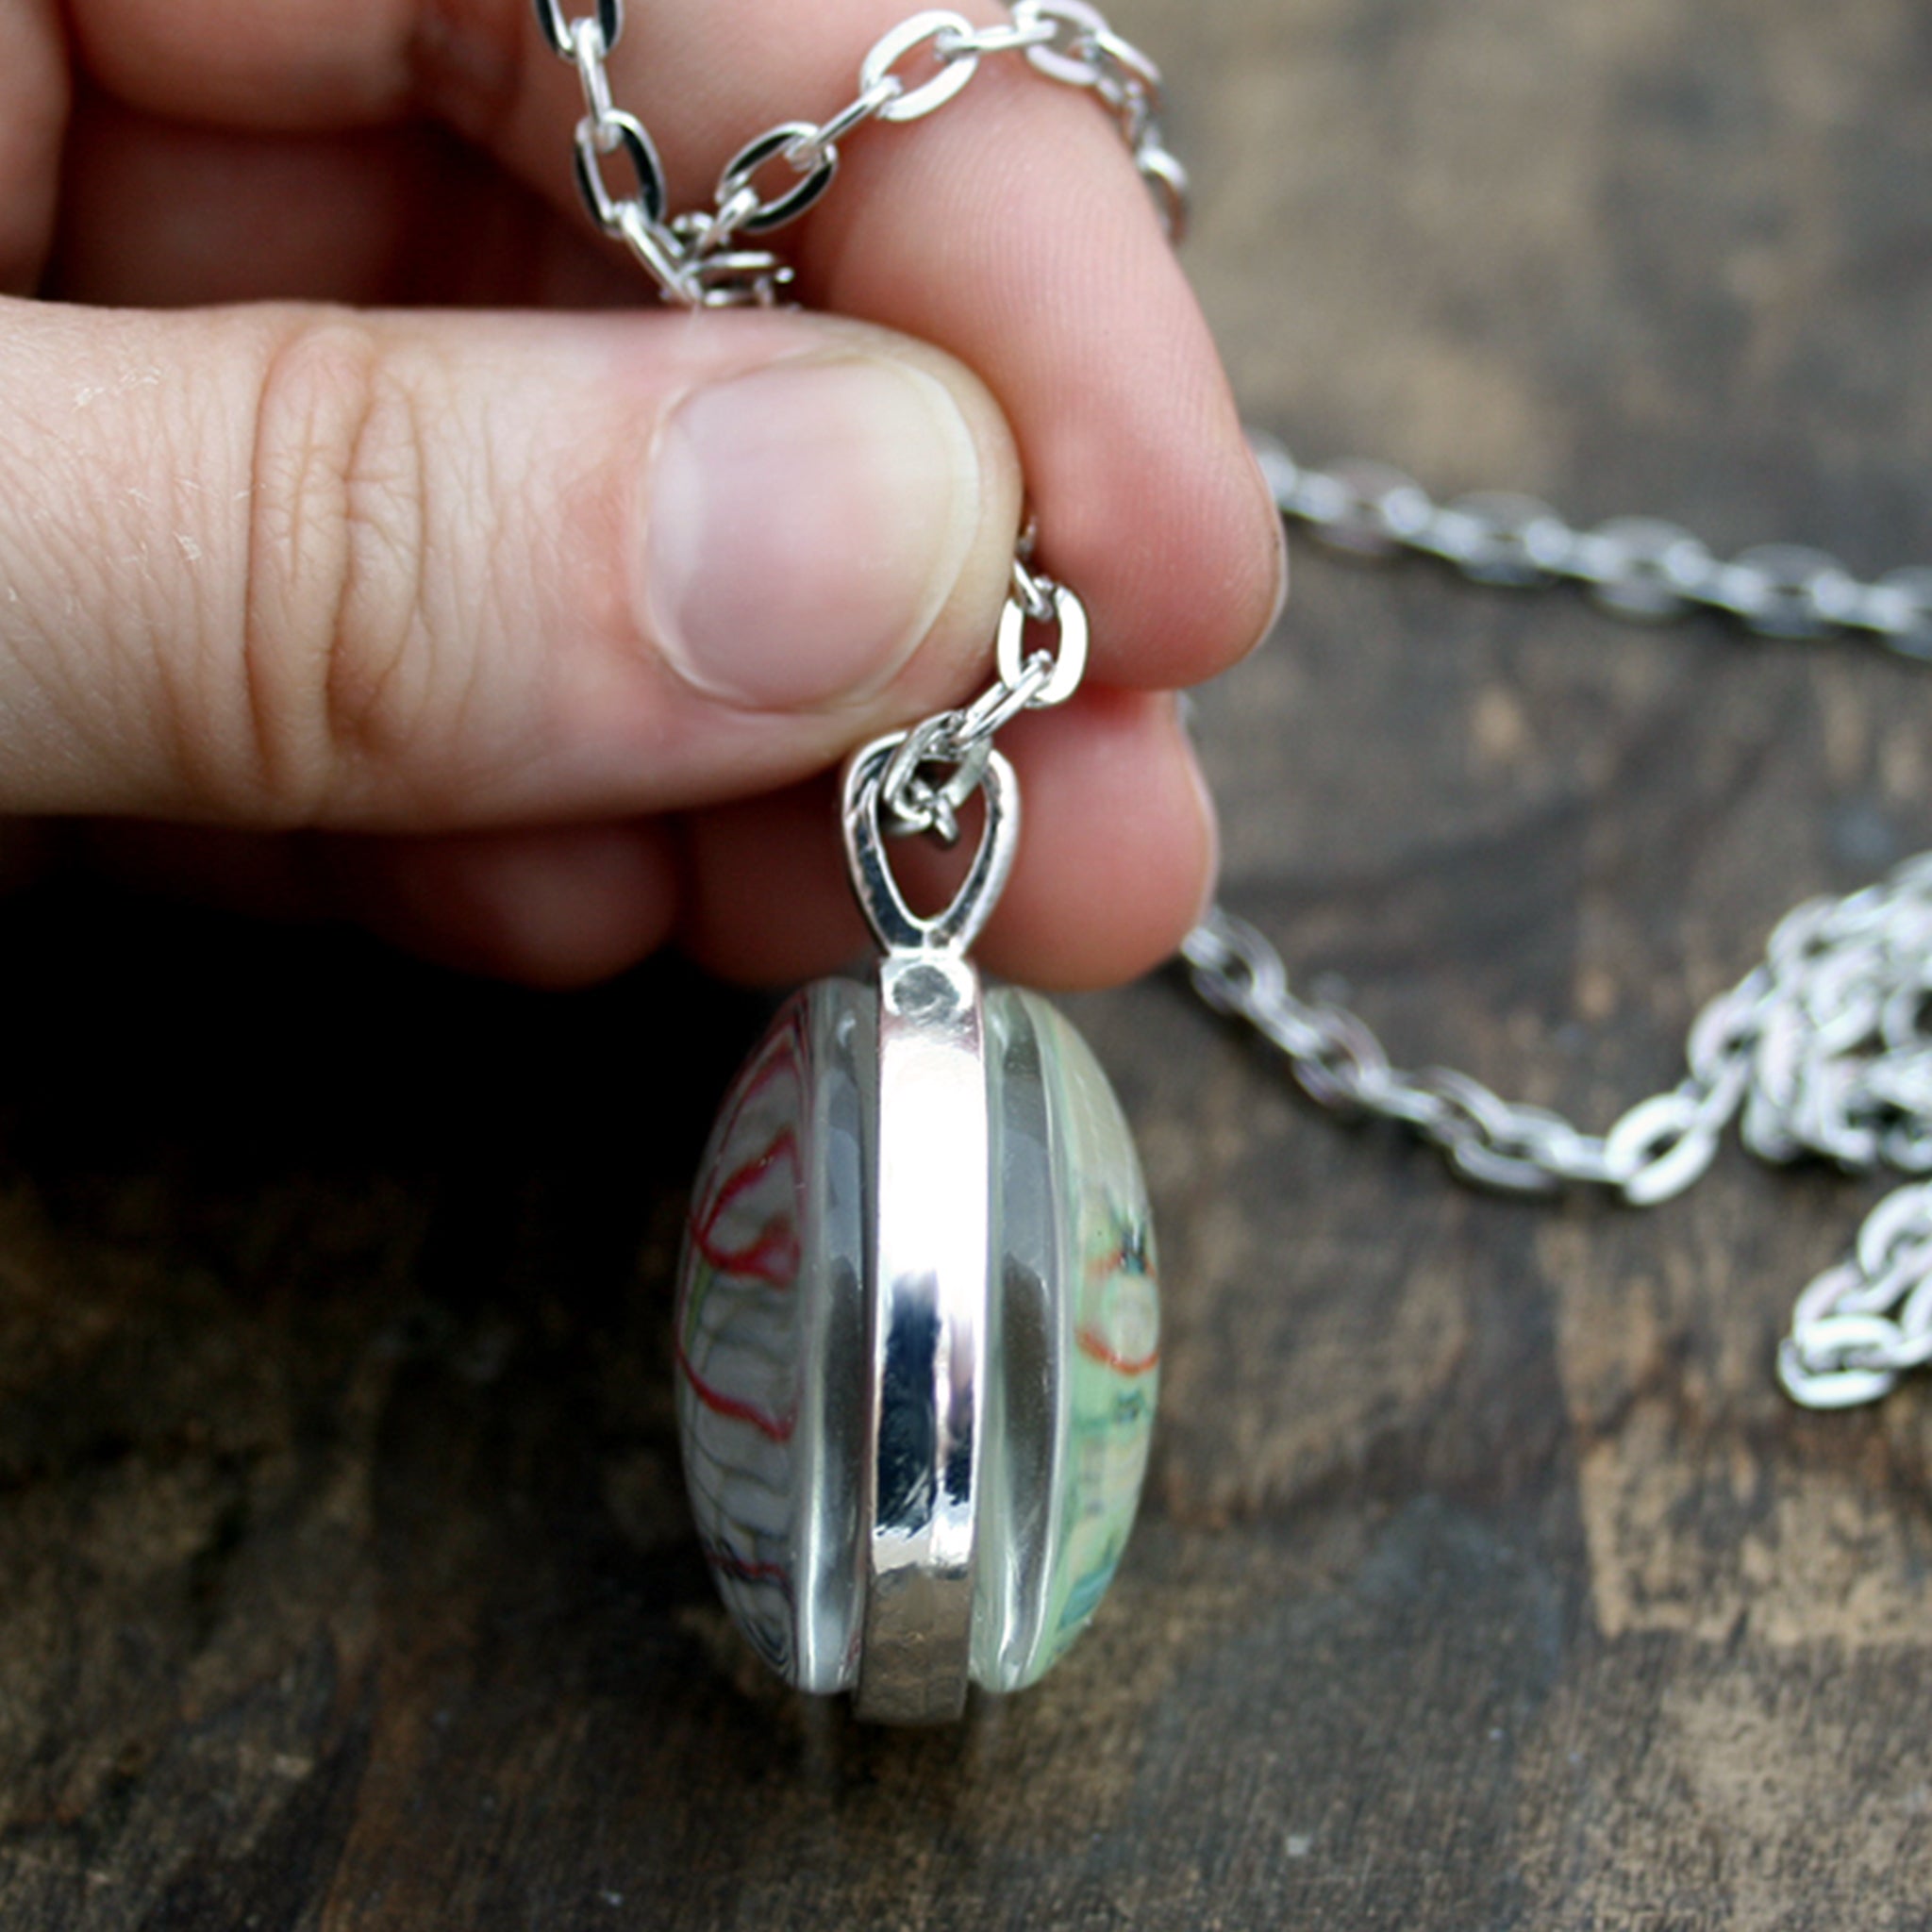 Hold in hand Silver tone double sided pendant necklace featuring maps of customers choice